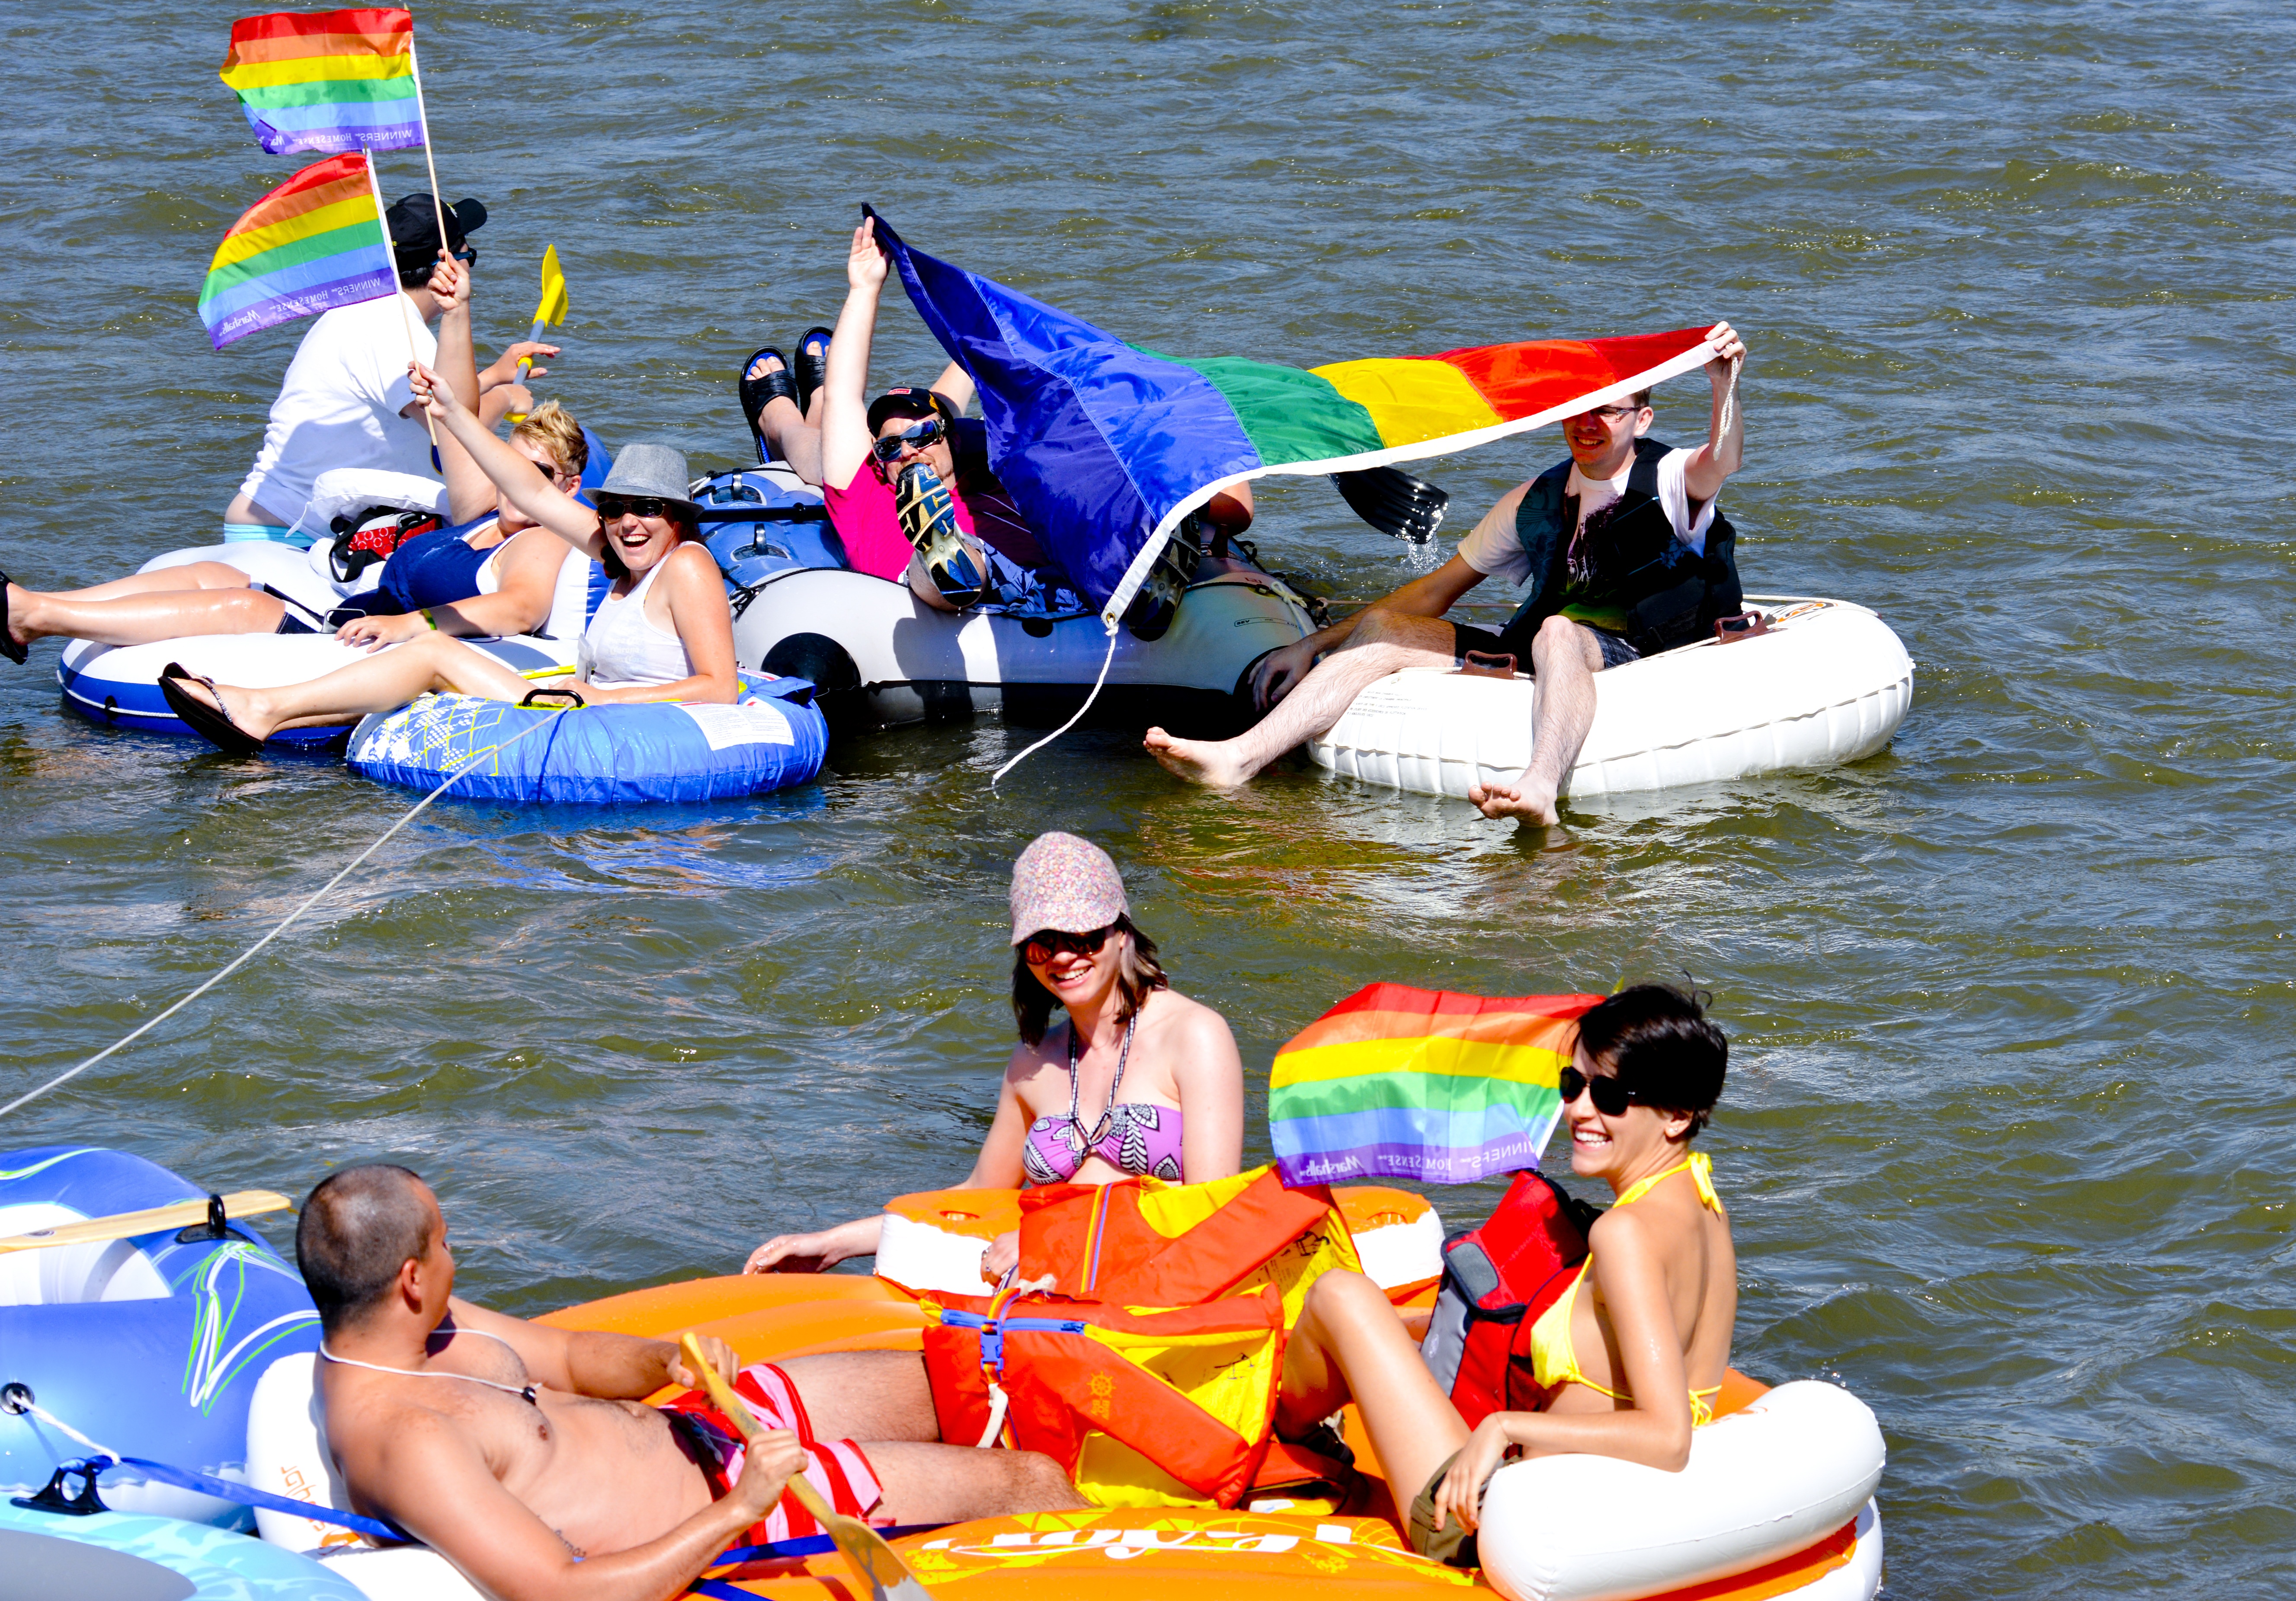 FLOATING PRIDE - Members of Alberta’s pride community soak up the warm weather while enjoying a float down the Red Deer River this past weekend as part of the Central Alberta Pride Days.